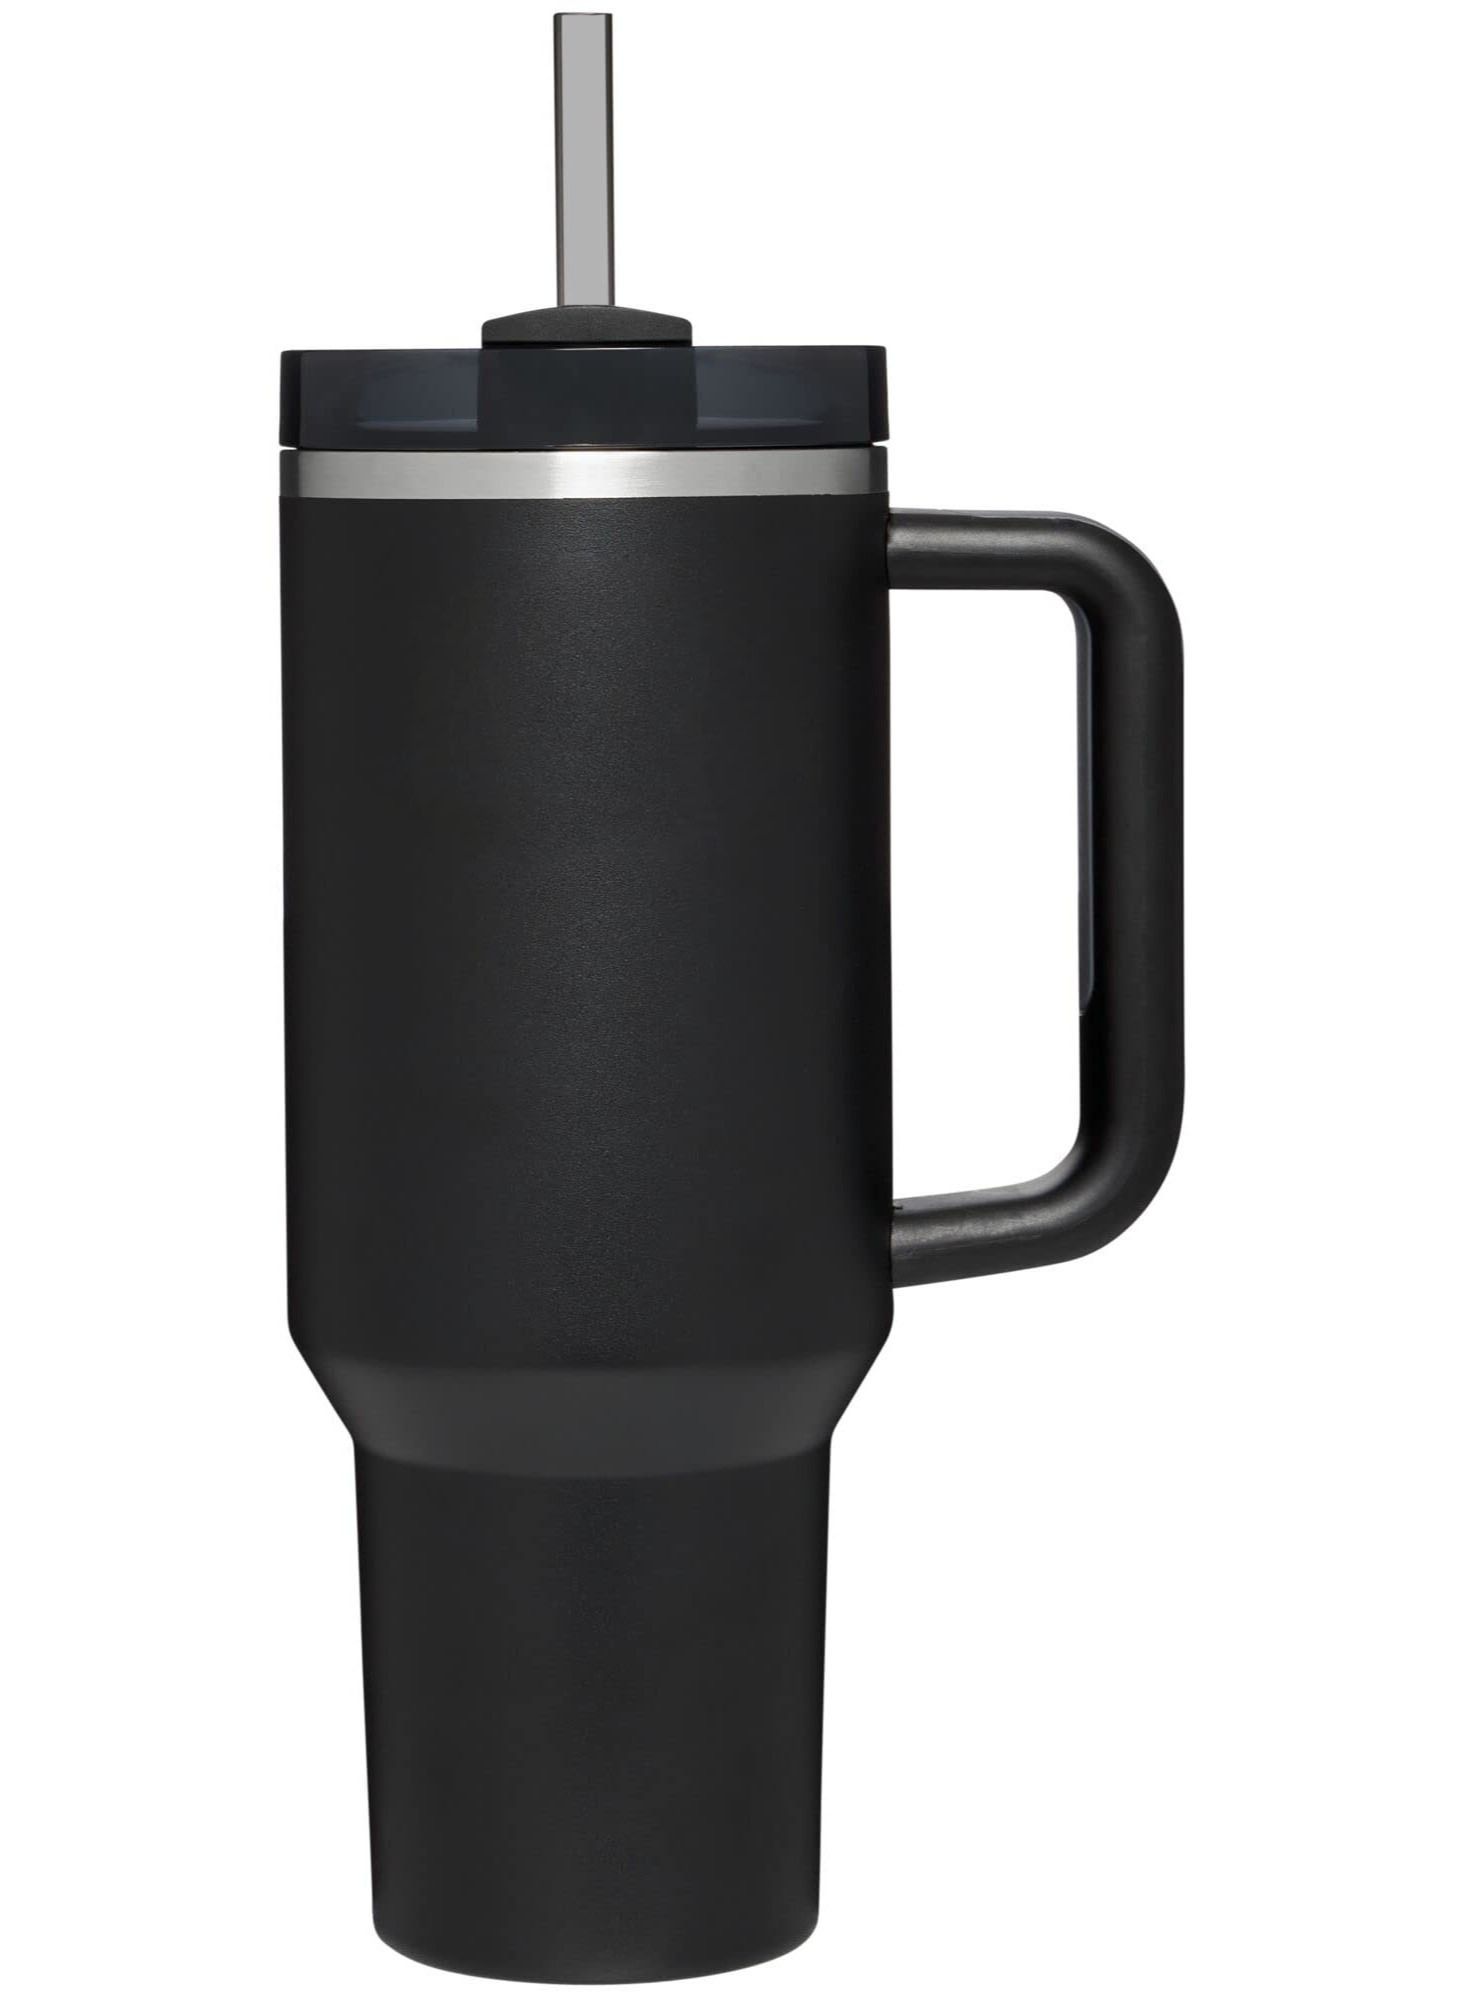 Quencher H2.0 FlowState Stainless Steel Vacuum Mug with Lid and Straw for Water, Iced Tea or Coffee, Smoothies and More